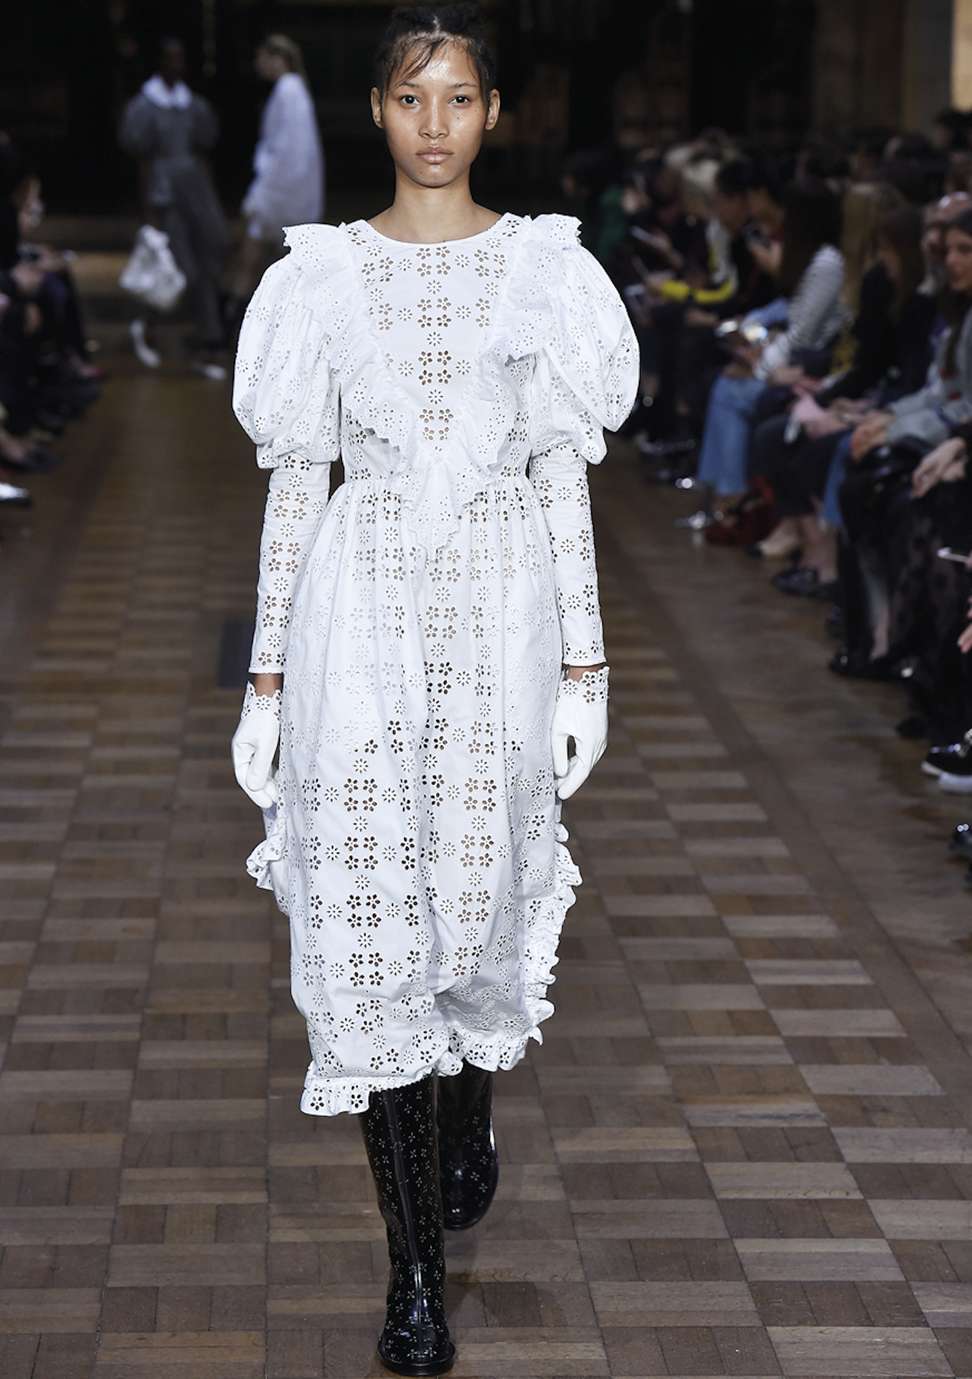 A dress from Simone Rocha for spring-summer 2017 at London Fashion Week in September.